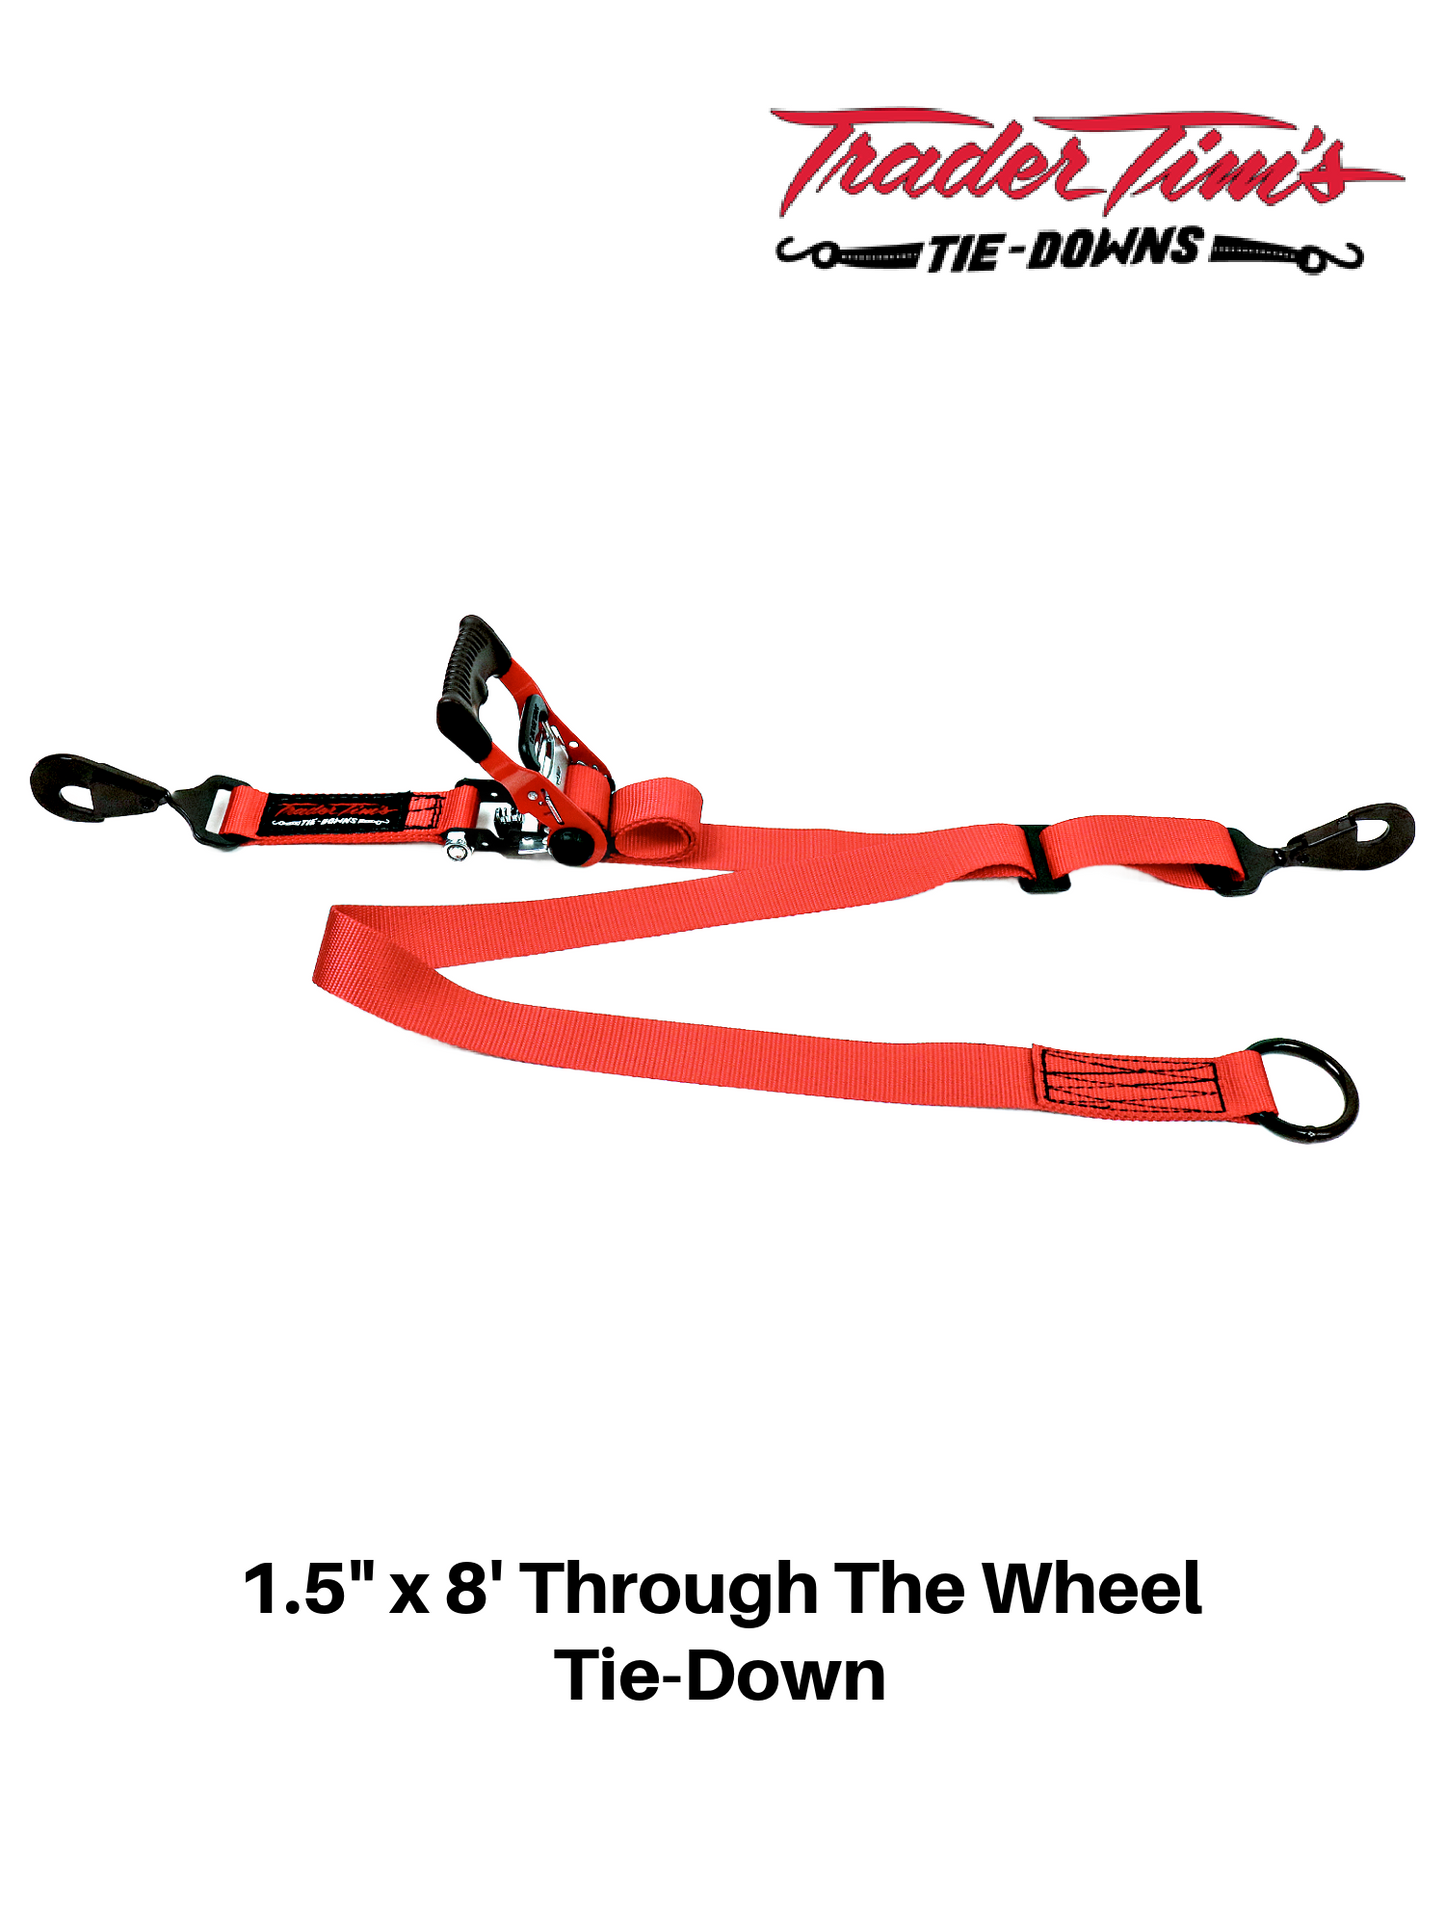 1.5" x 8' Through The Wheel Tie-Down - Red or Black